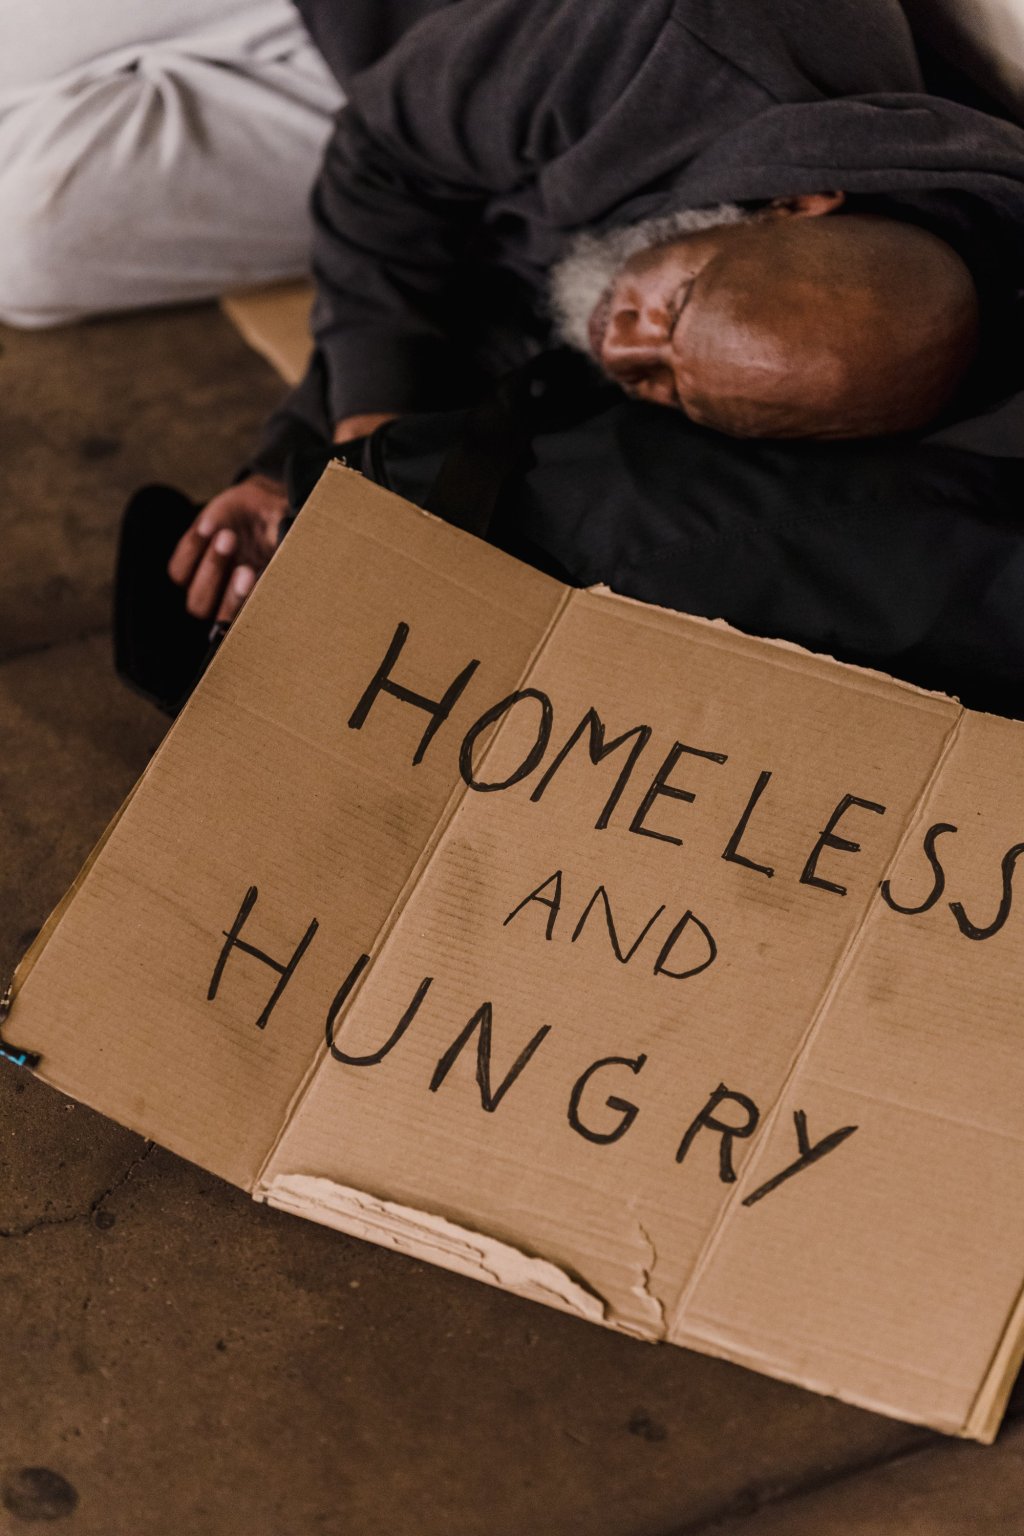 The Dignity of Territory: A Look at Homelessness and Poverty in Society